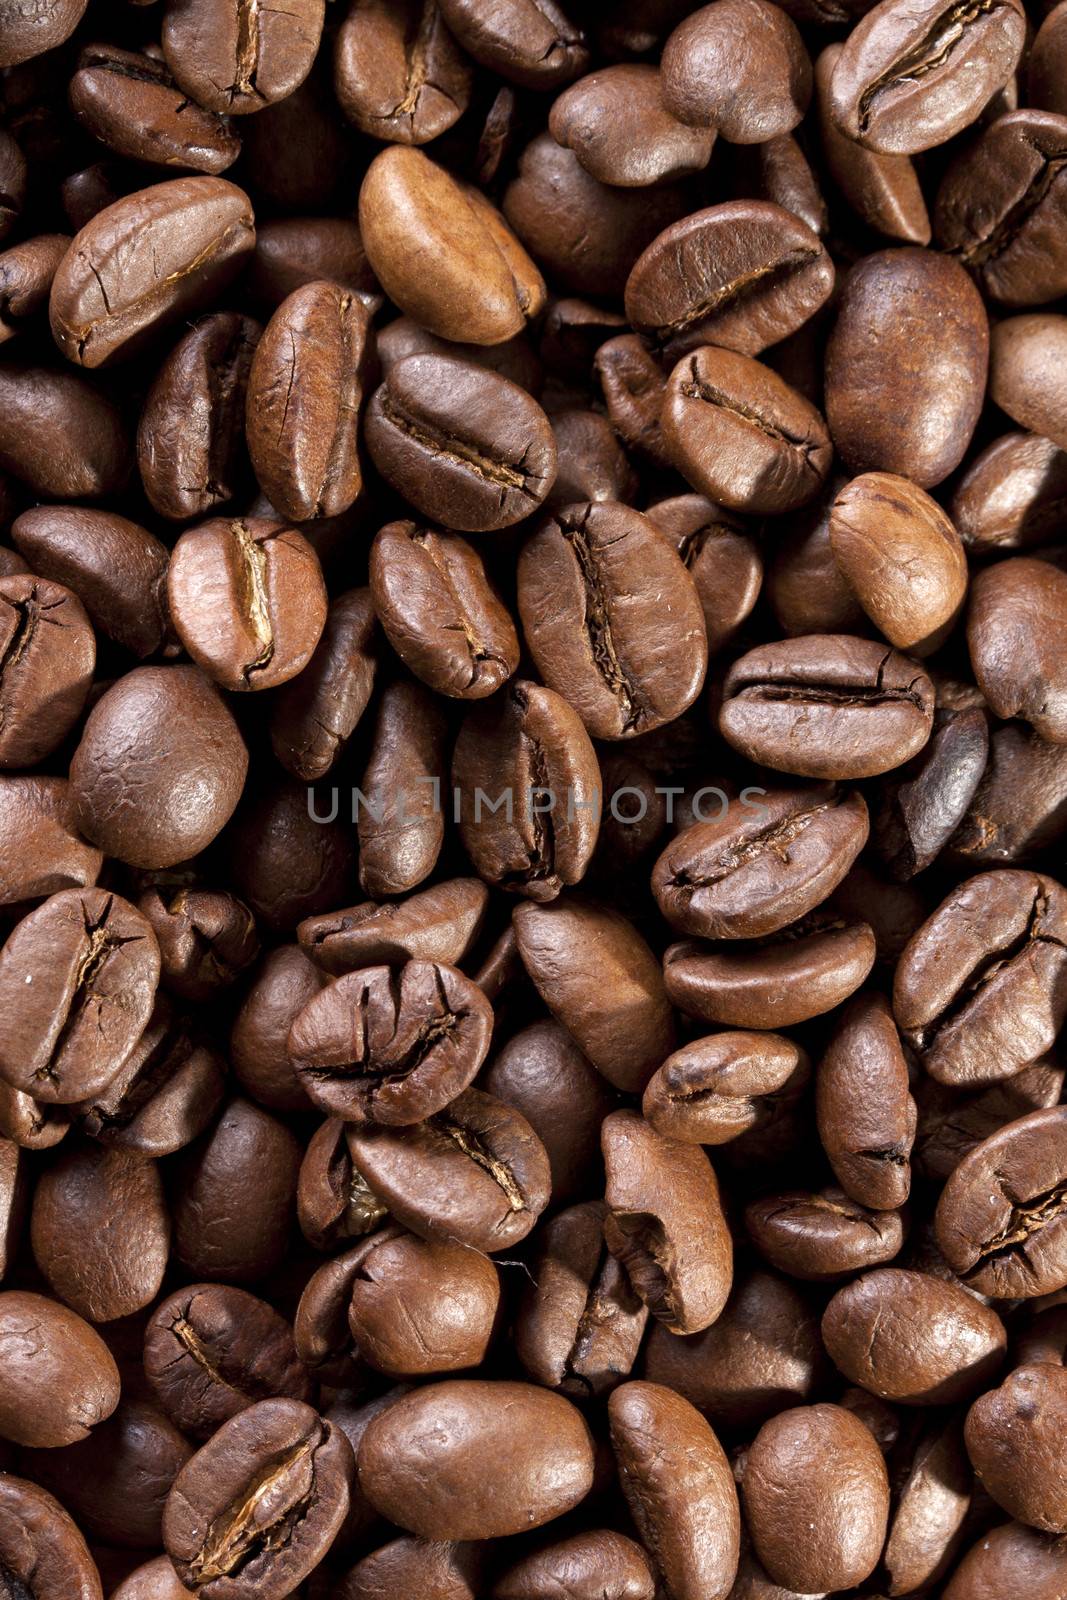 coffee beans by Tomjac1980